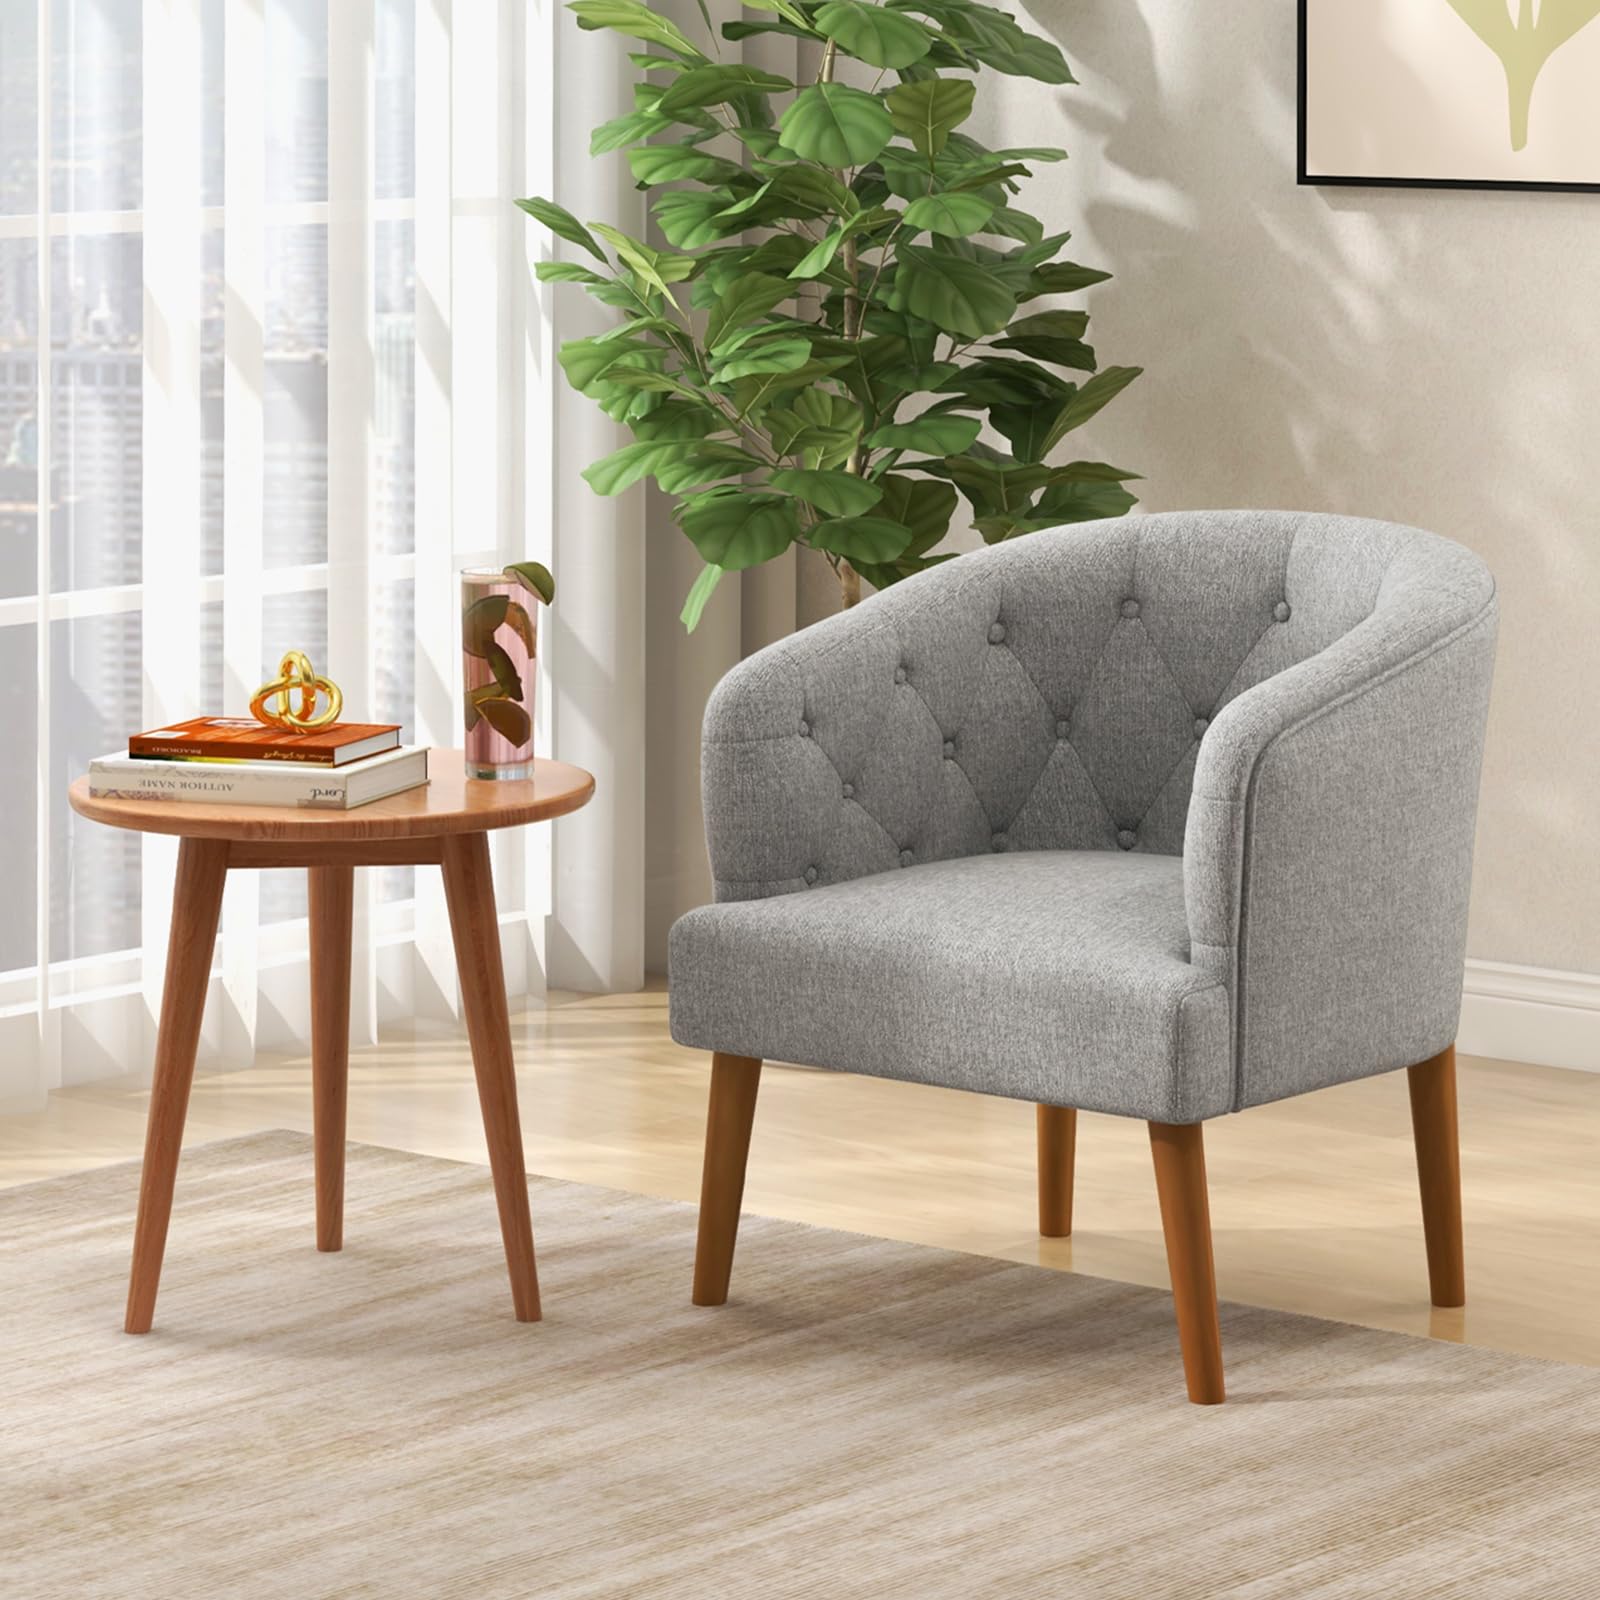 Giantex Tufted Accent Chair Set of 2 Grey, Upholstered Accent Armchair with Rubber Wood Legs